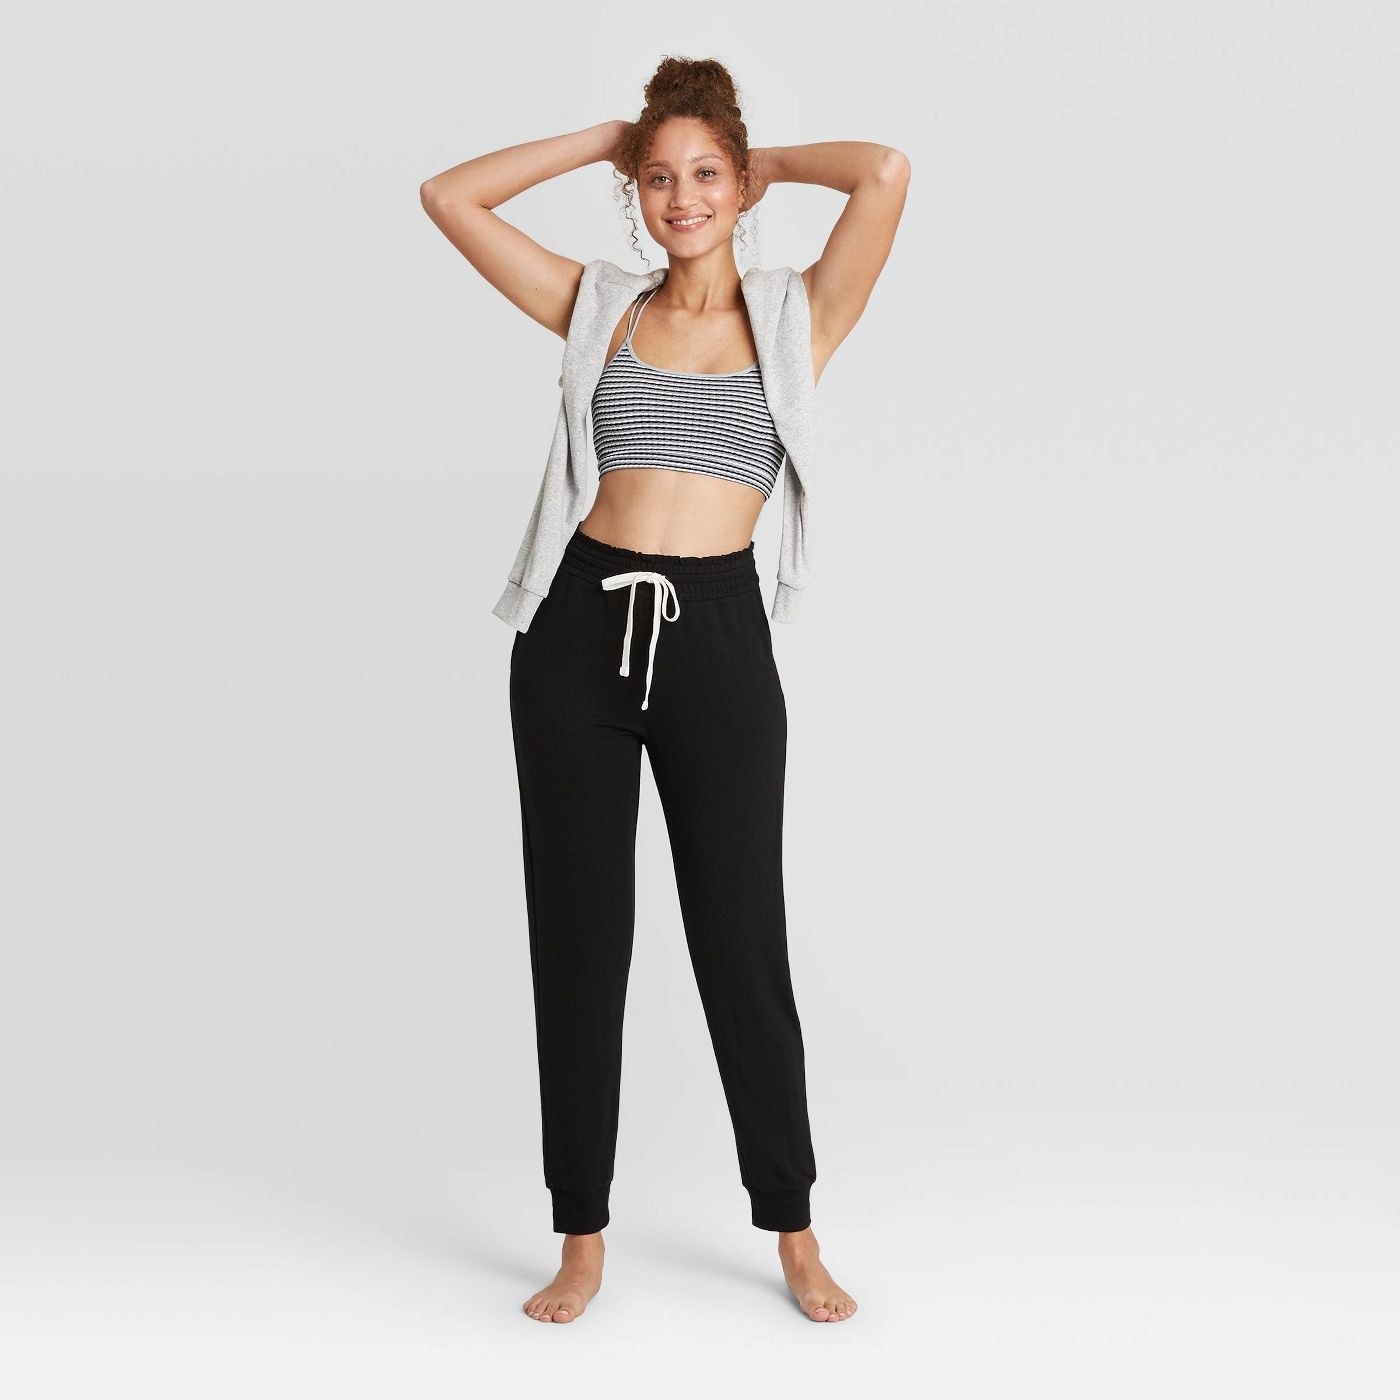 Model in black pants with sports bra and sweatshirt 